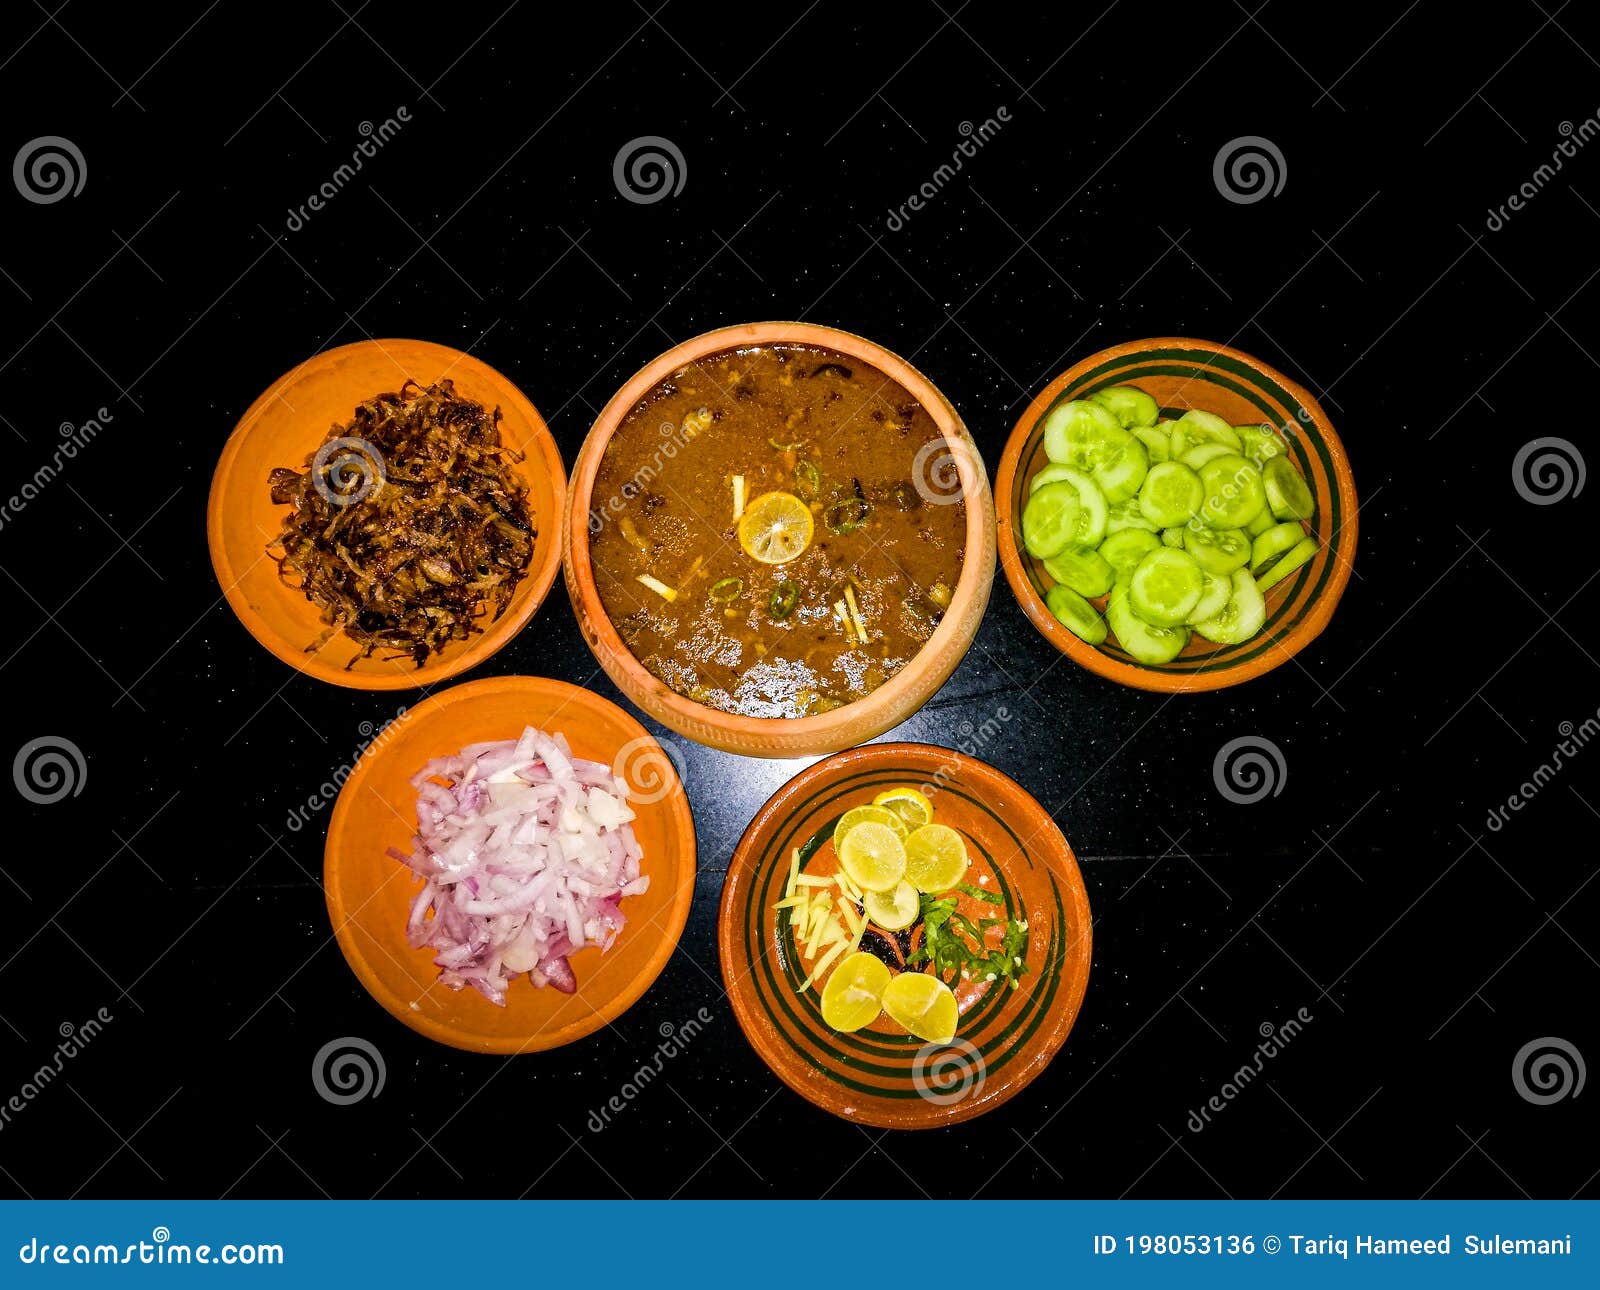 desi food, very famous in pakistan and india